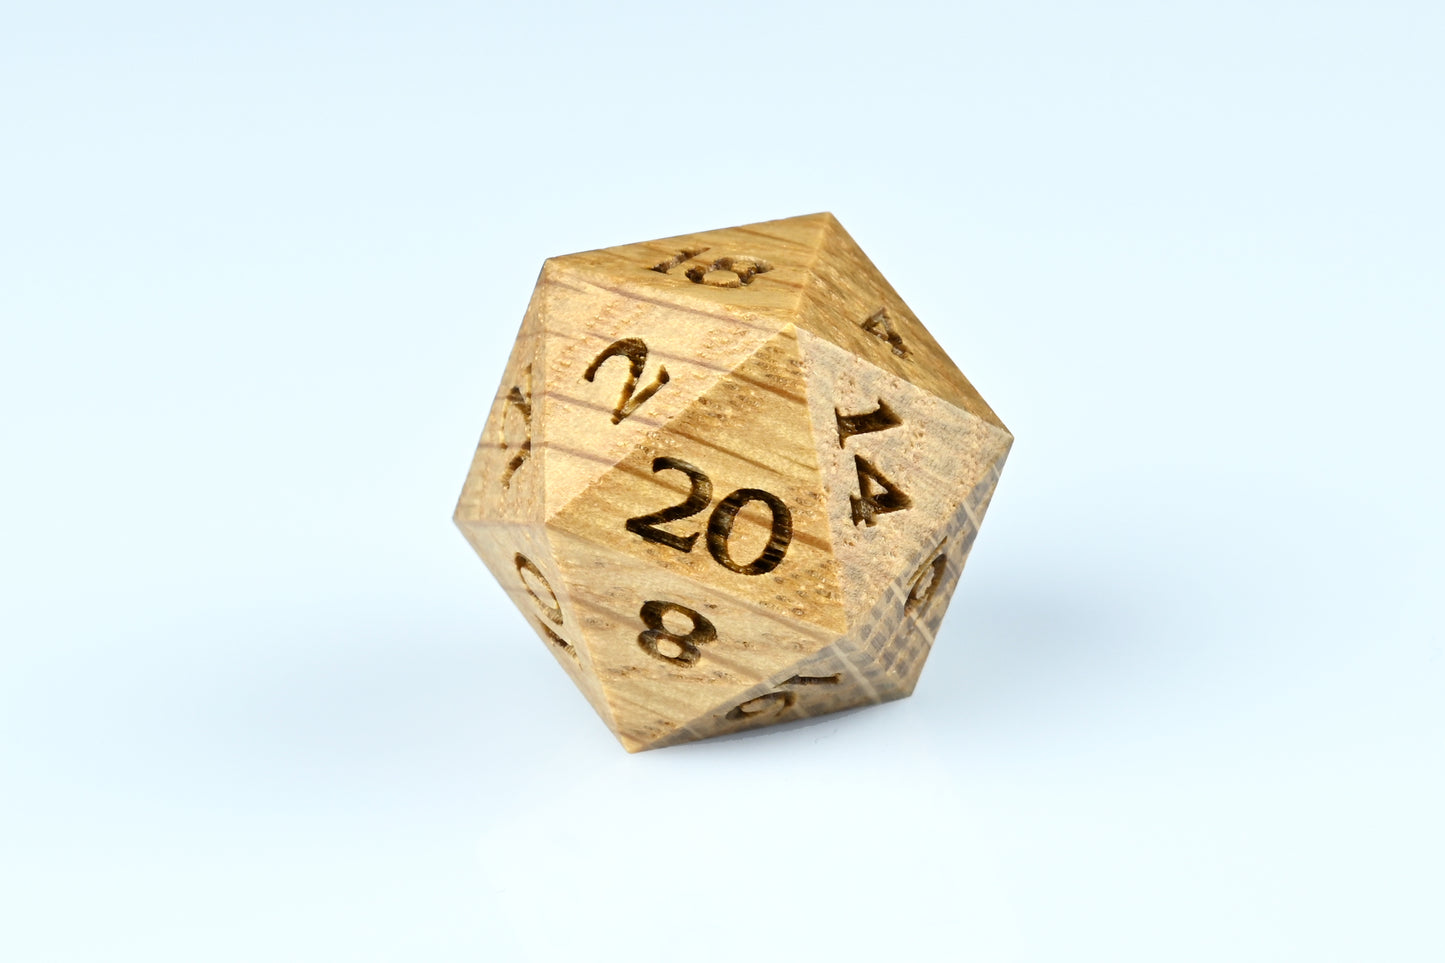 White oak wood D20 for dnd rpg dungeons and dragons